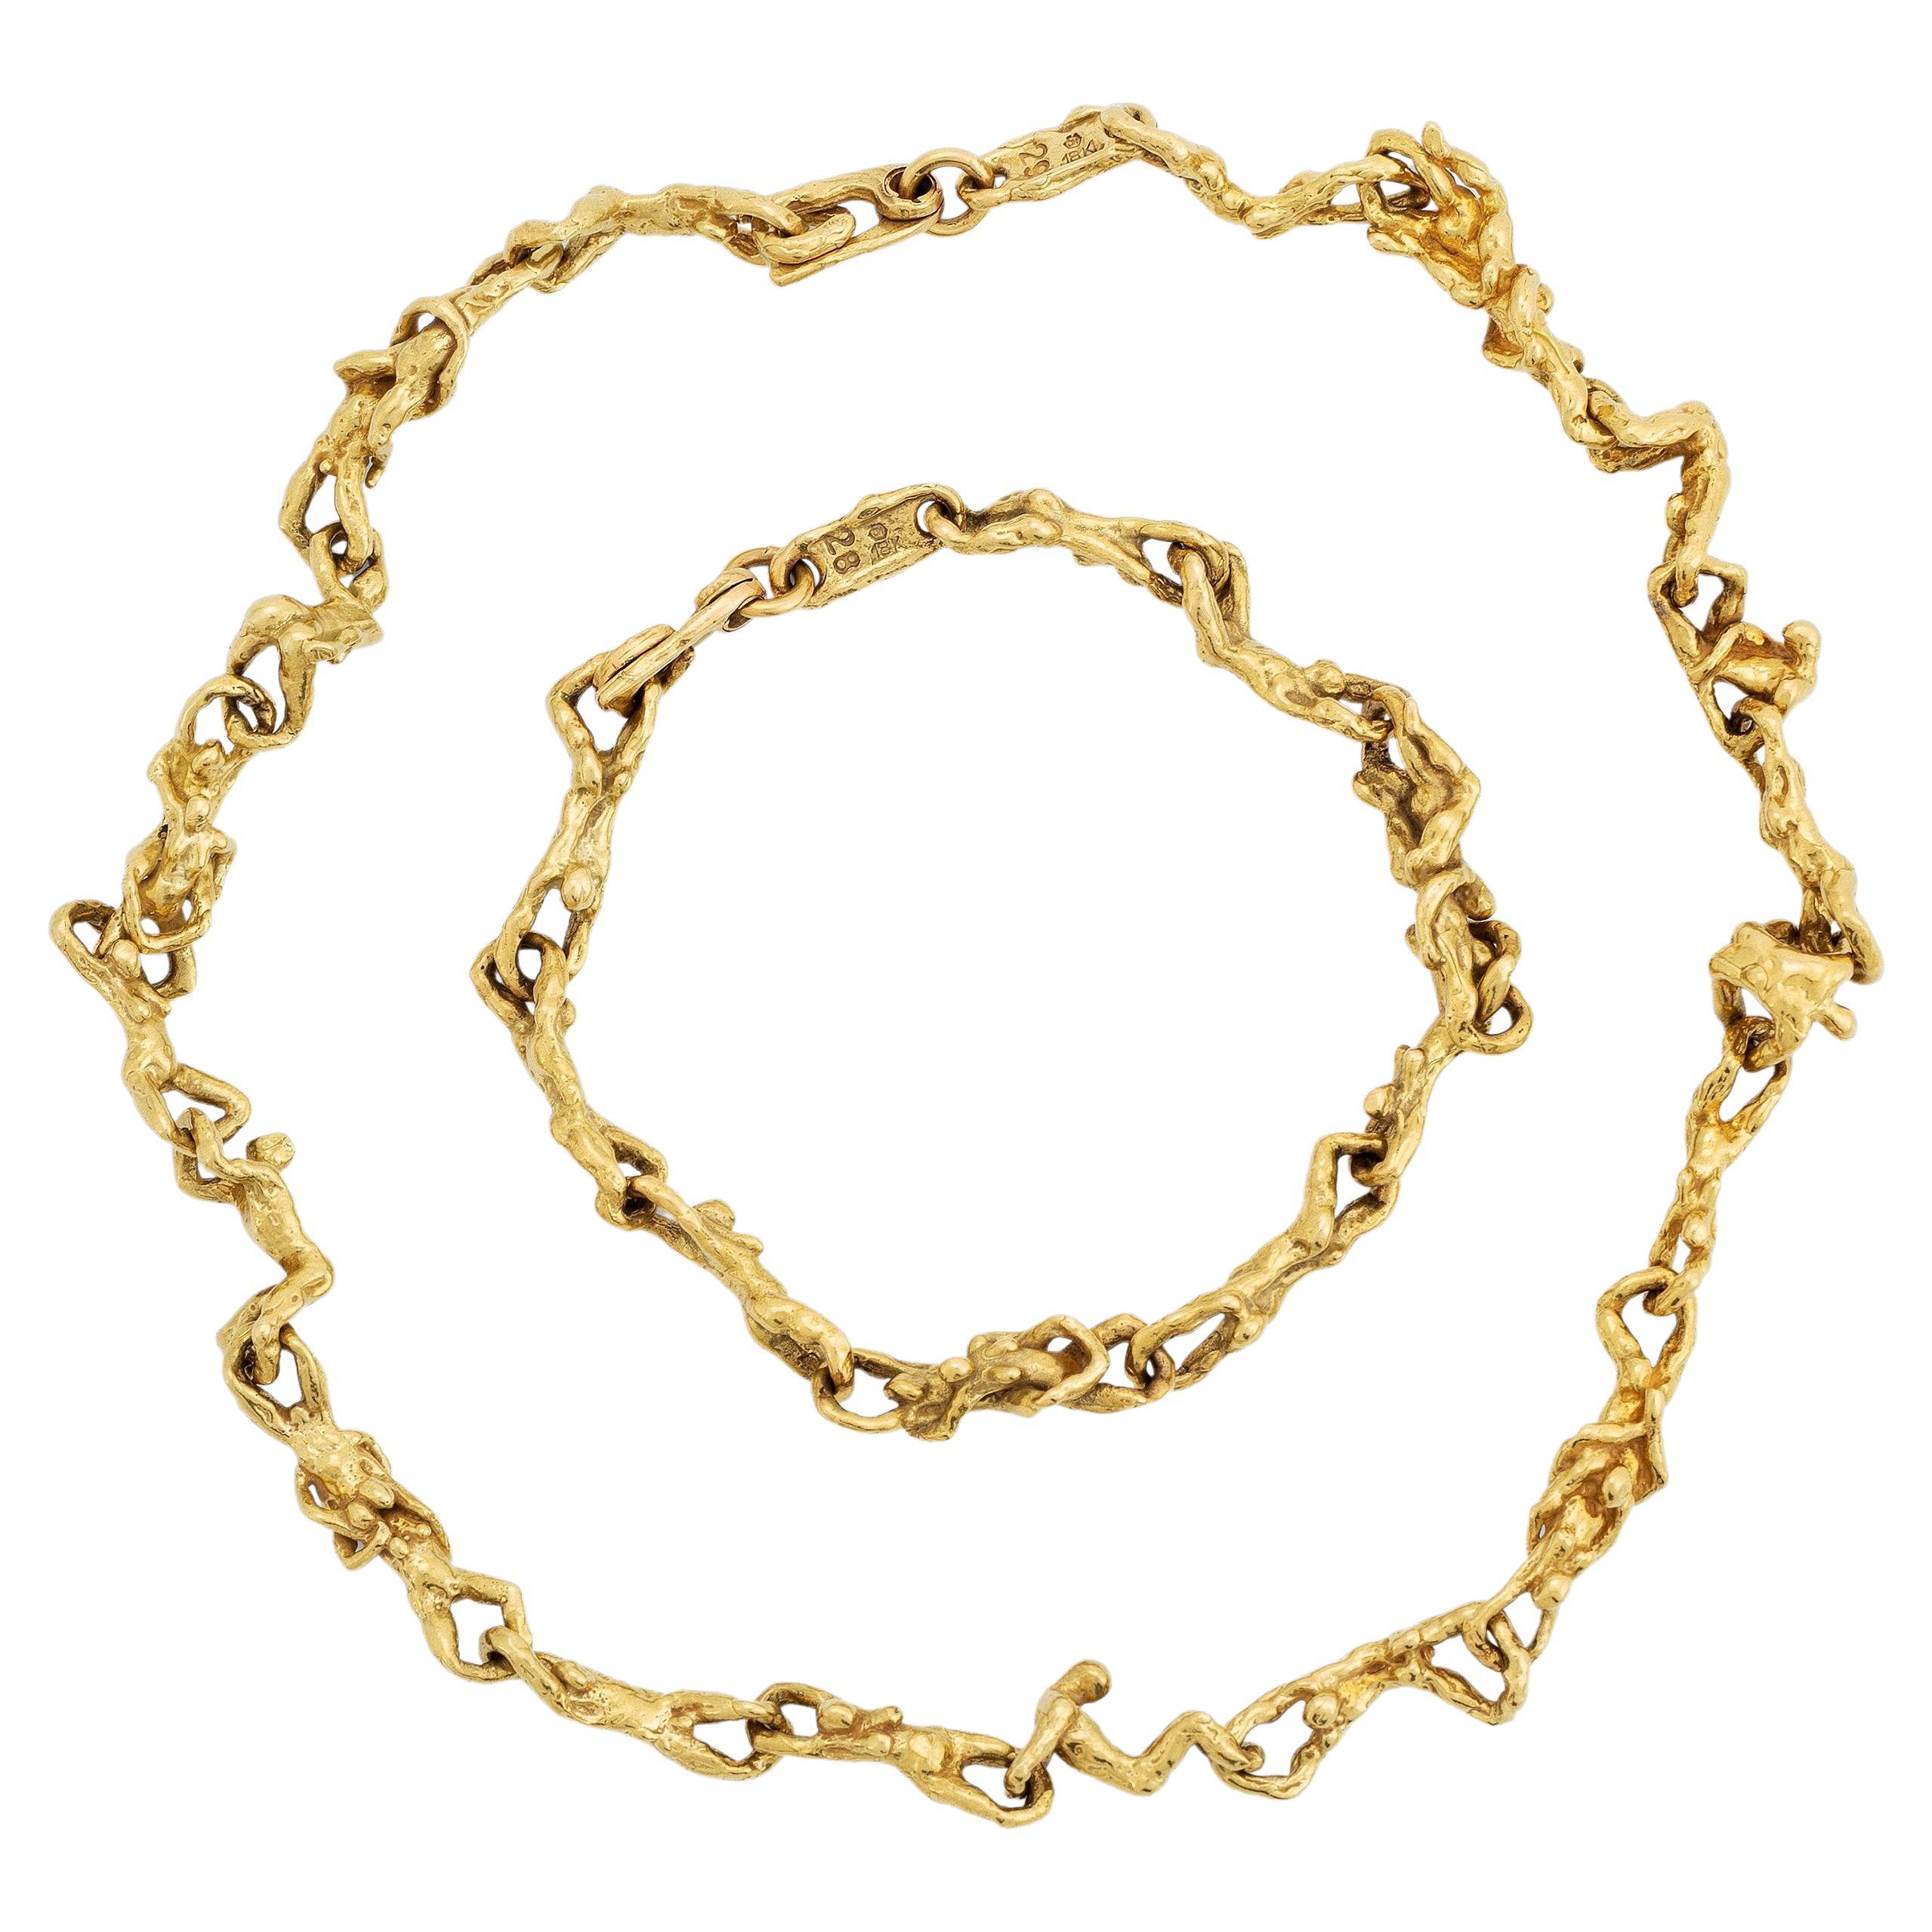 Definitely a conversation piece. Lots of attitude without being in your face.

A sculptural erotic 1970s 18K gold necklace and bracelet suite. Drawing inspiration from Jean Mahies, Jean Filhos and Salvador Dali's jewelry. It is bold, imaginative,